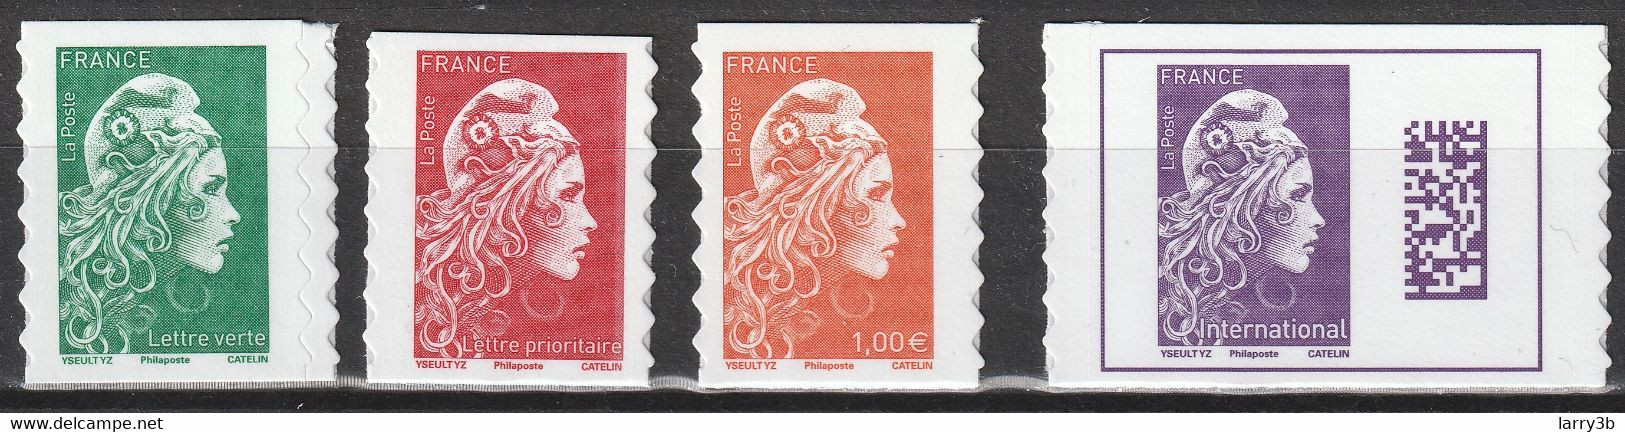 2021 - Y/T 1598a+1599a+1600+1656A Type II - Marianne Engagée Yseult (mention Philaposte Au Lieu De Phil@poste) AA - NEUF - Unused Stamps